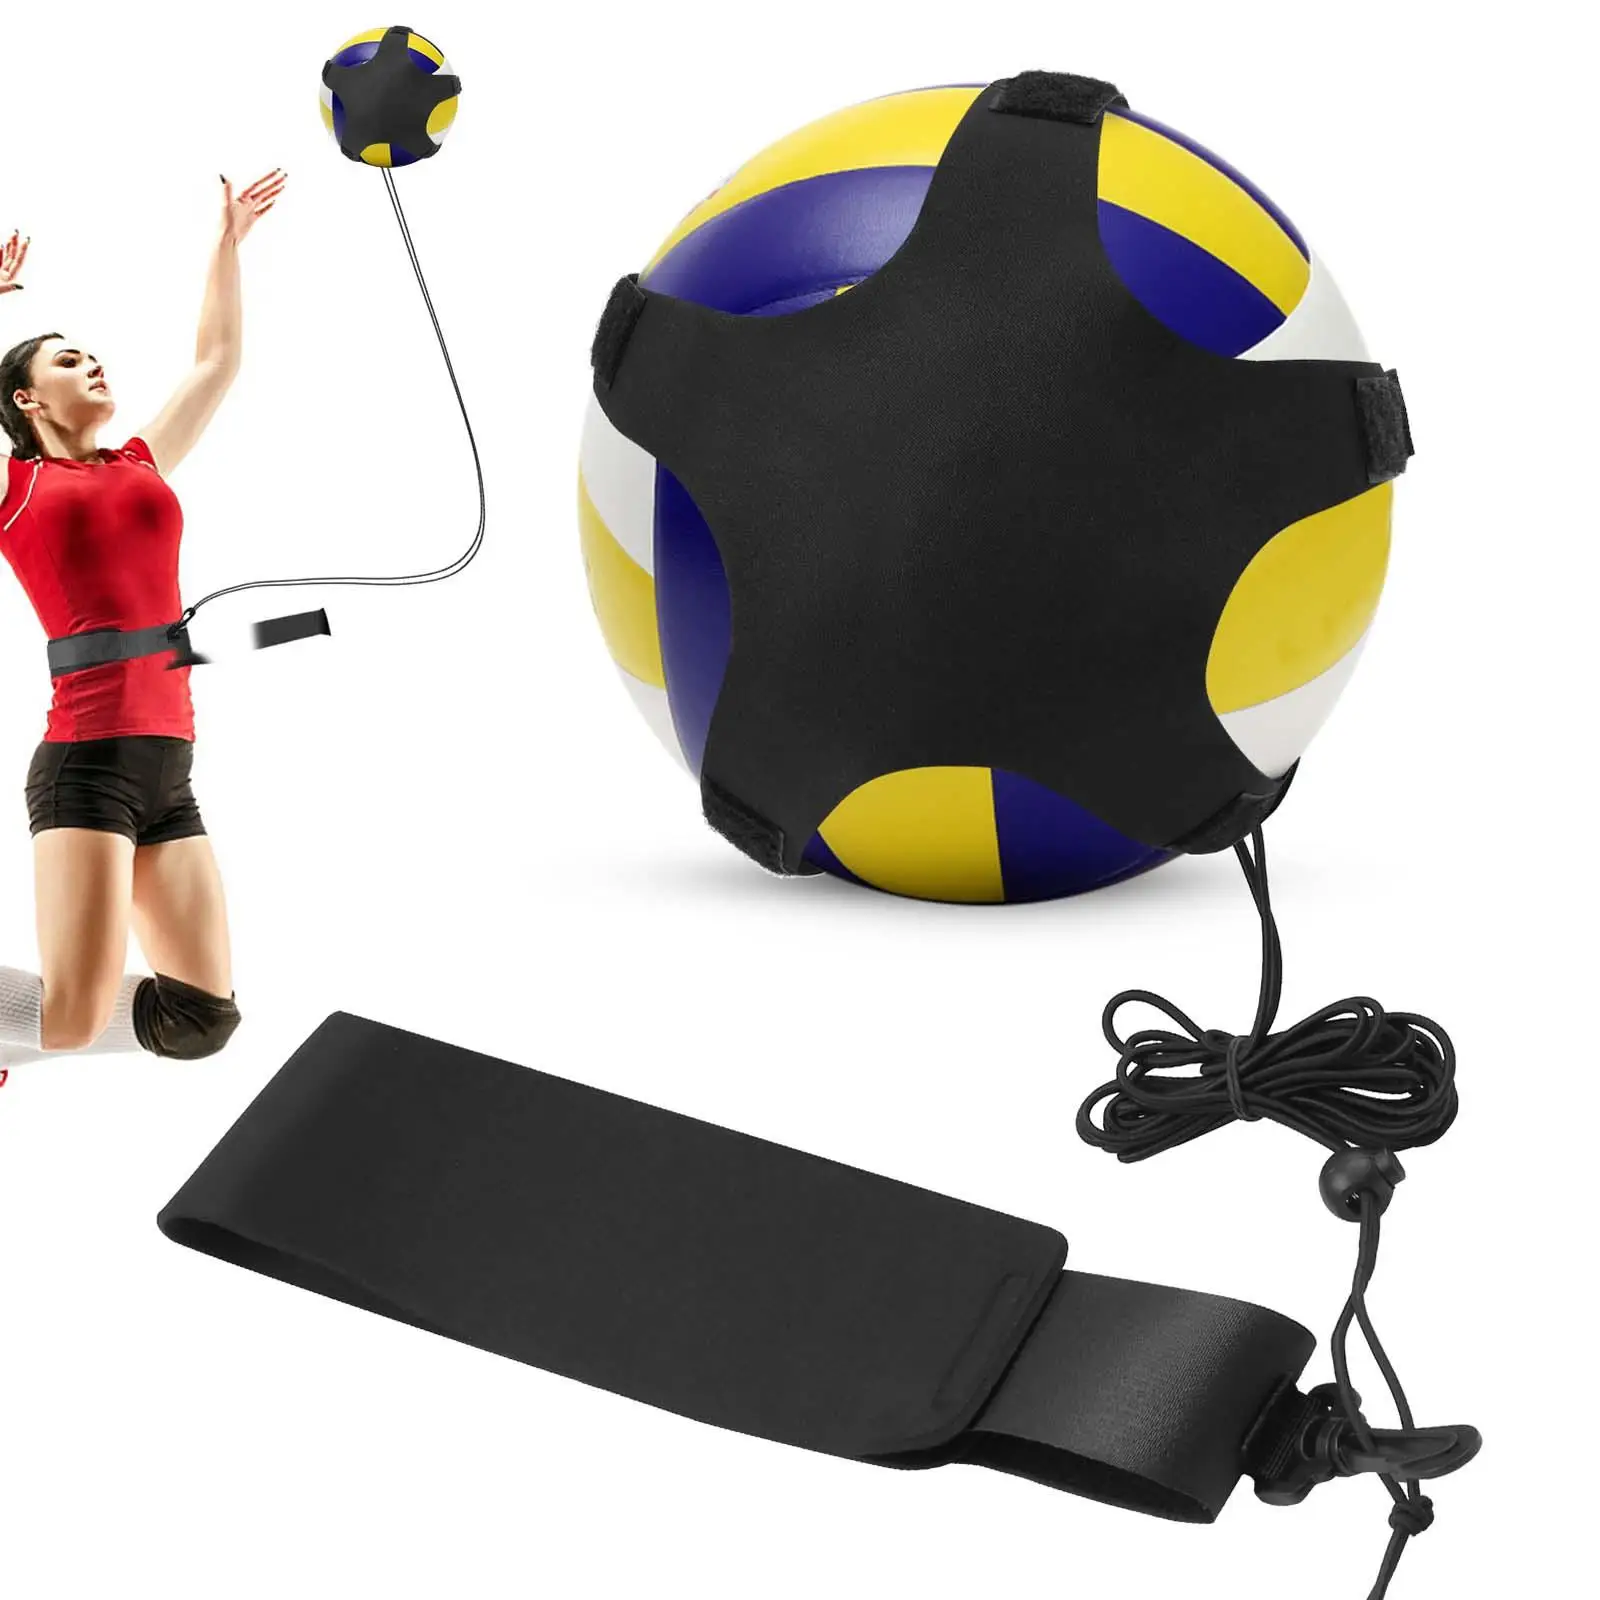 Volleyball Training Equipment Elastic Cord for Teen Arm Swing